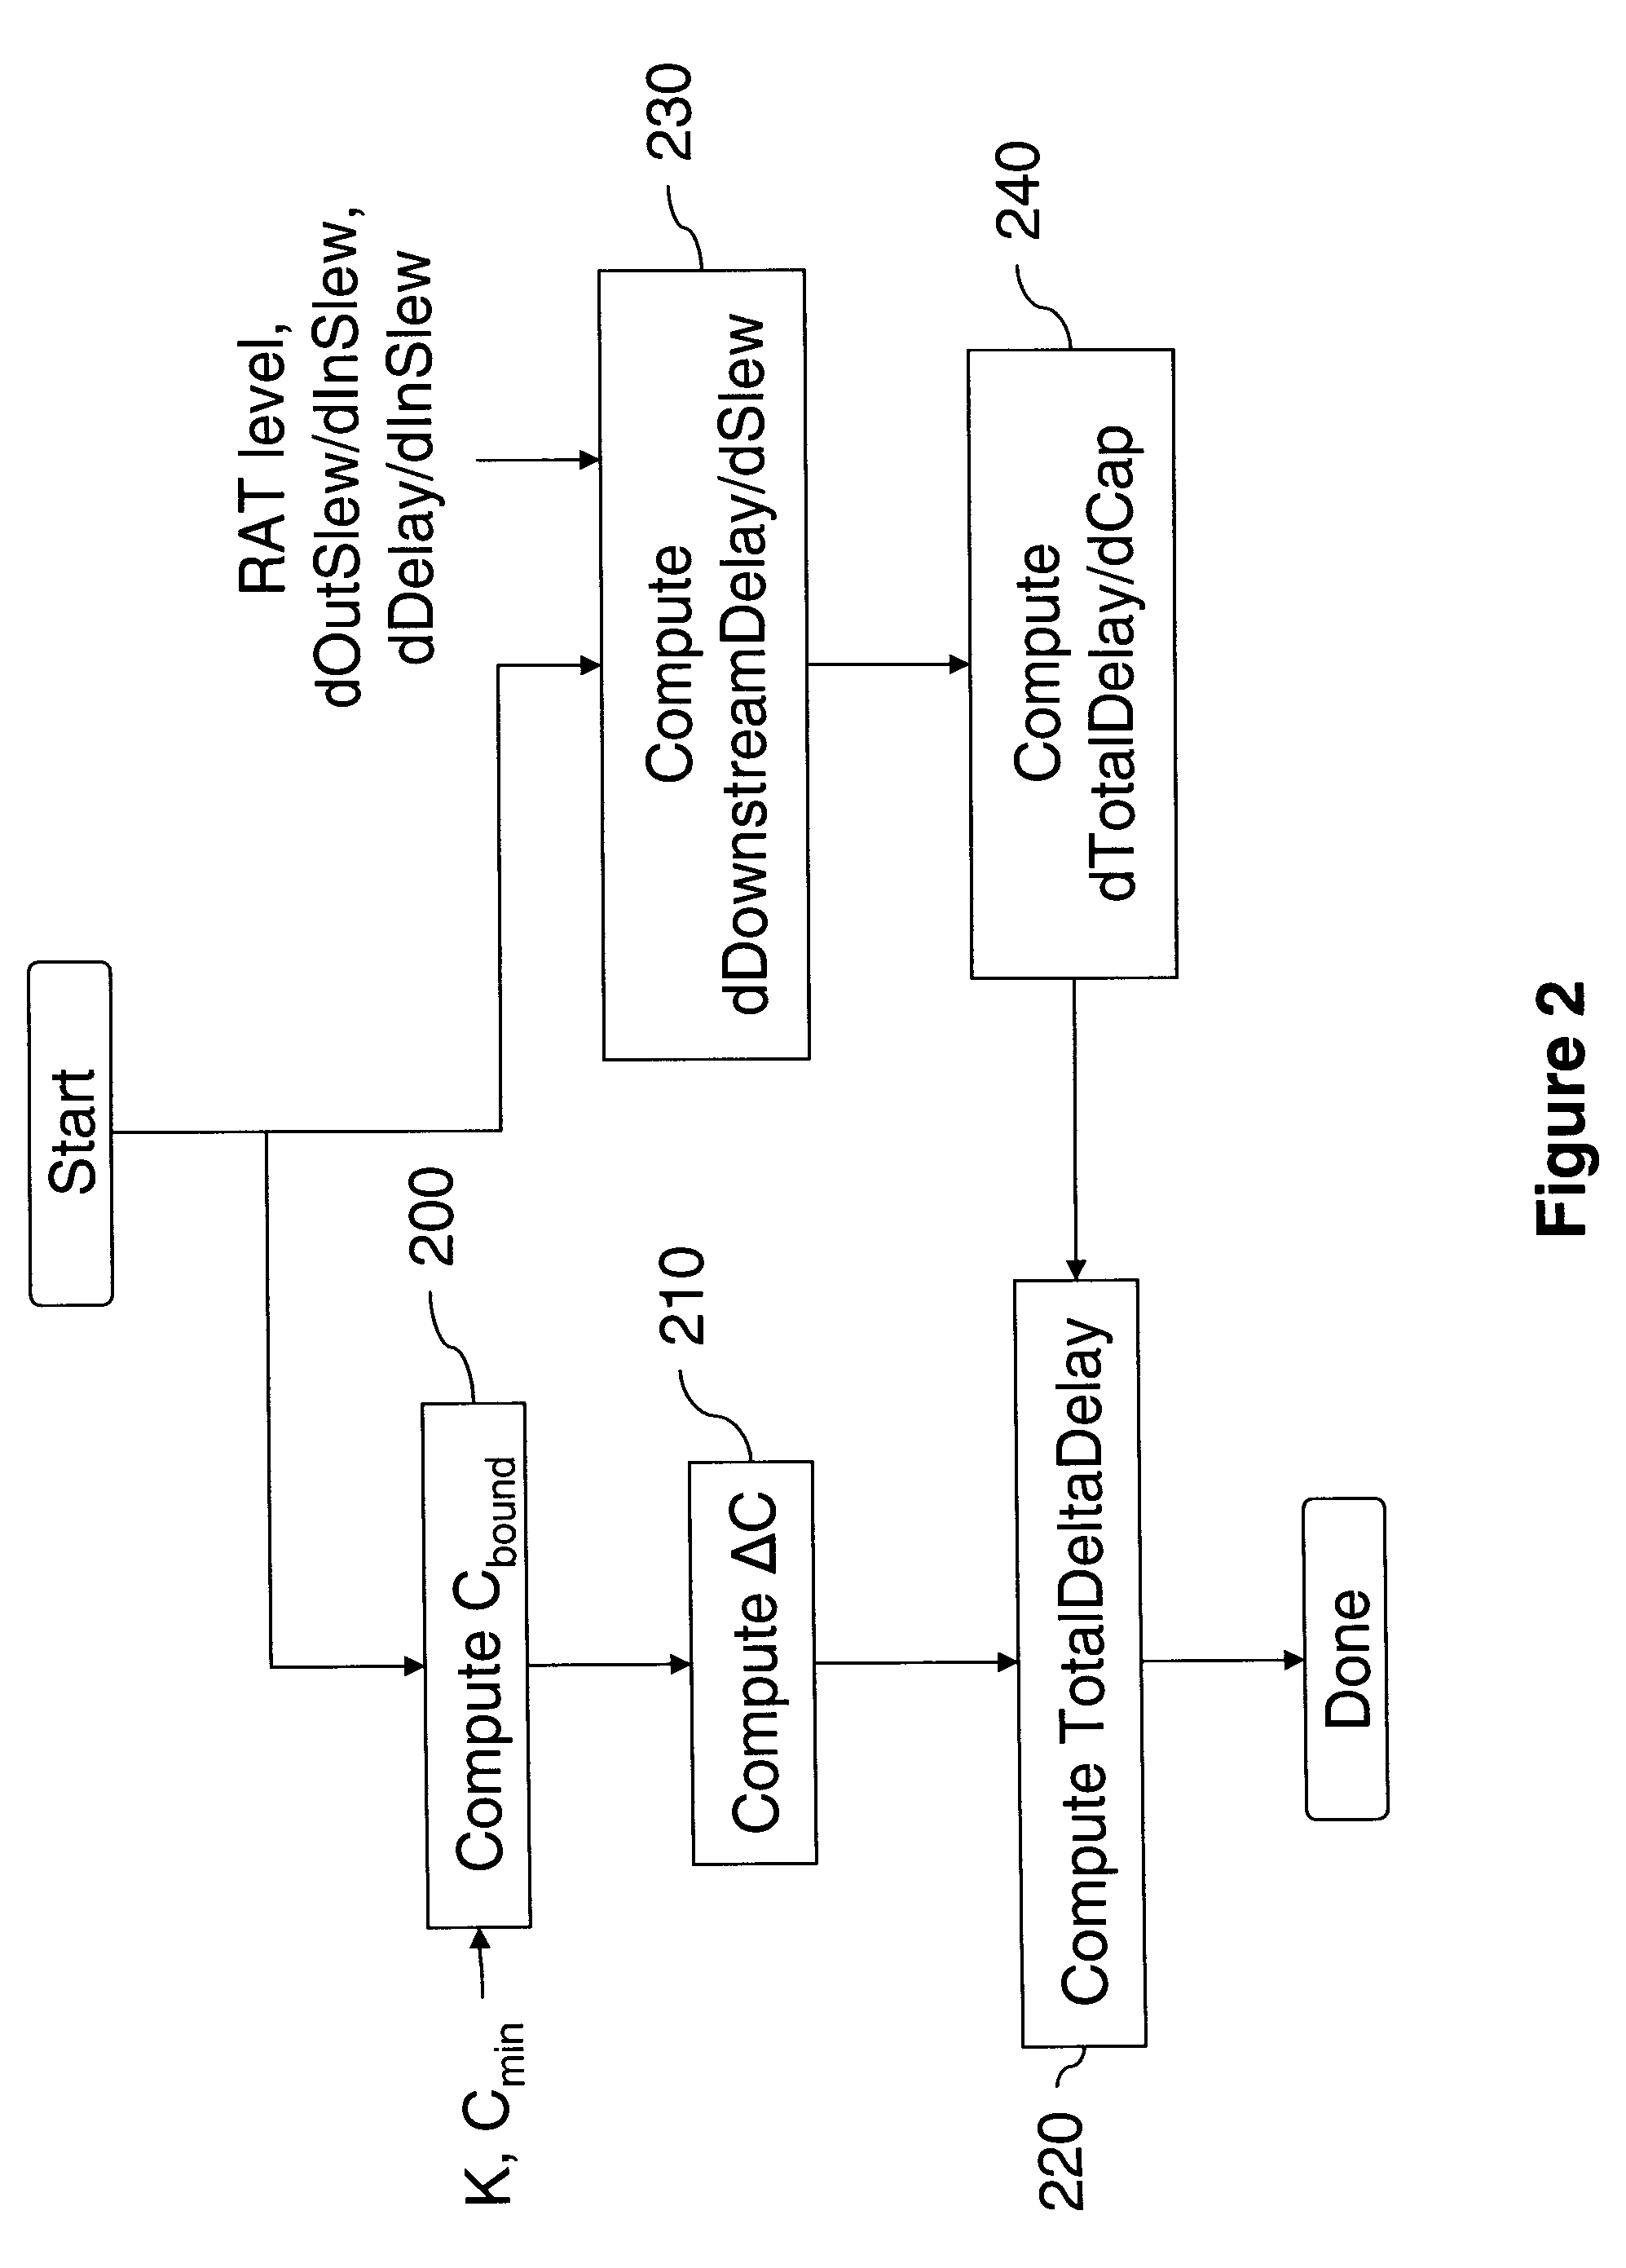 Method for optimizing an unrouted design to reduce the probability of timing problems due to coupling and long wire routes